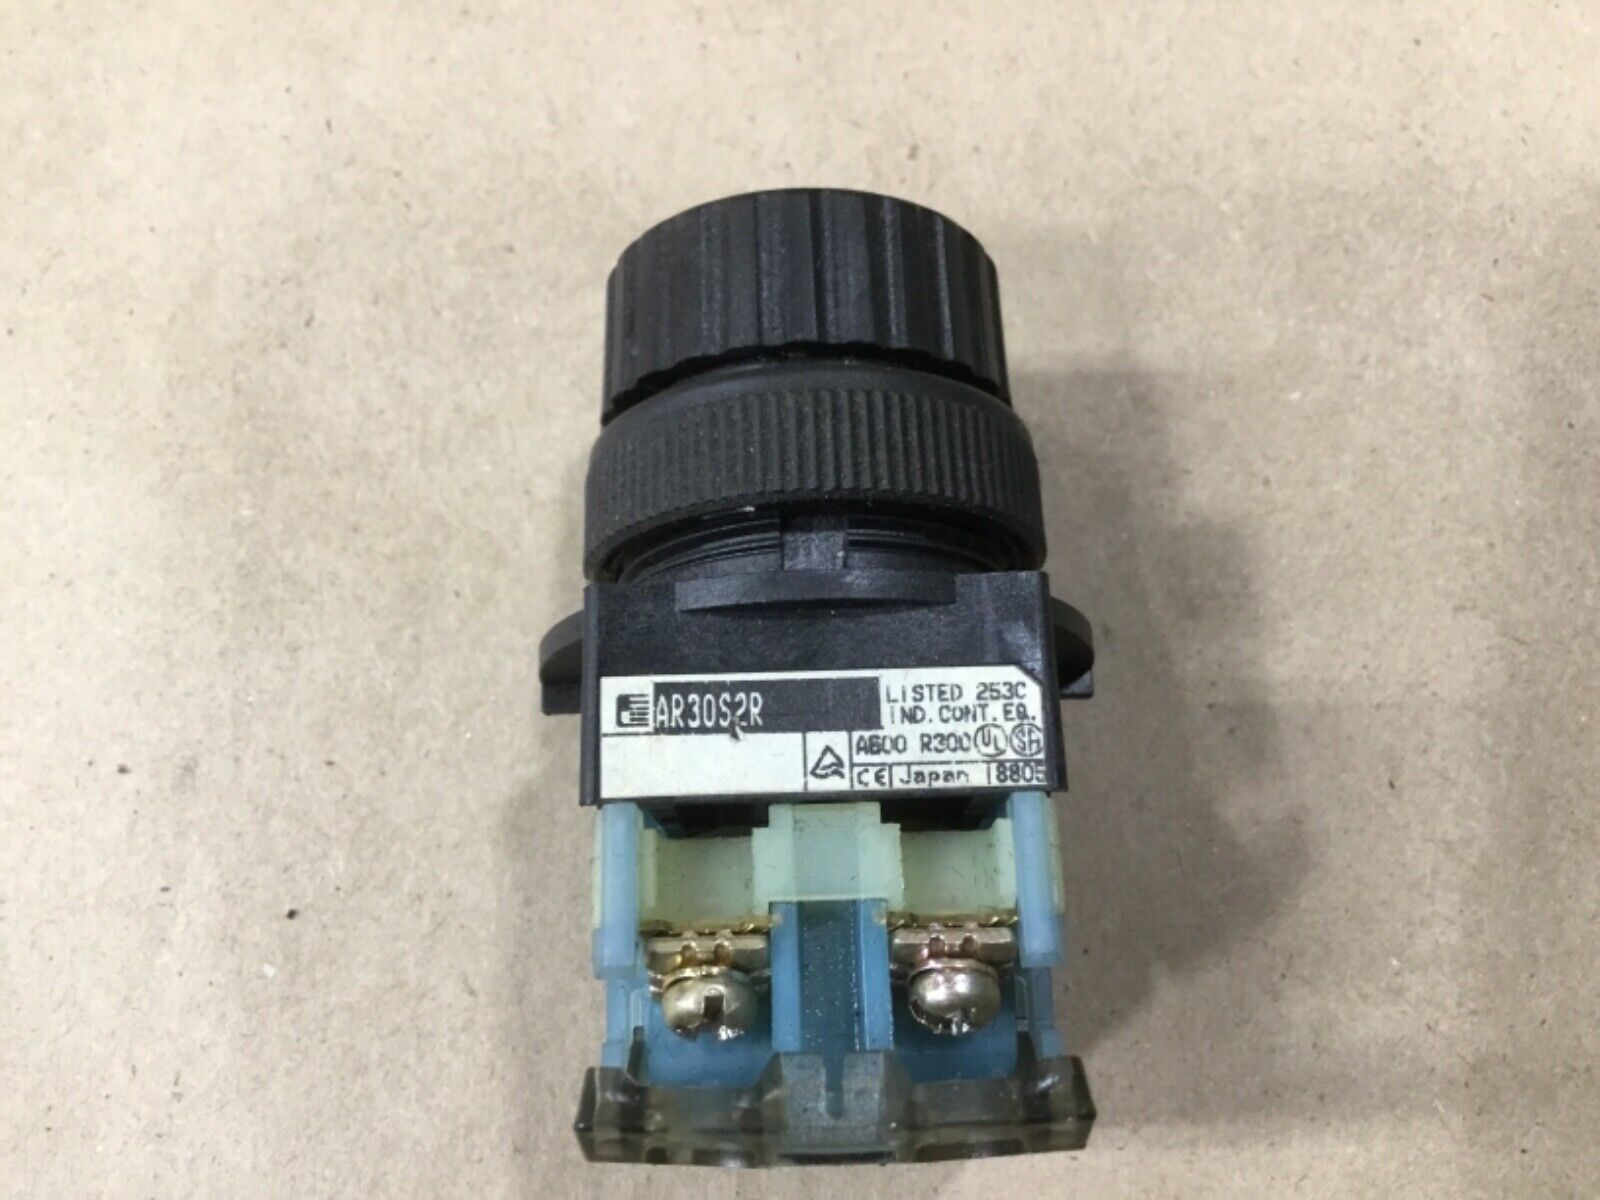 Fuji AR30S2R 2-Position Combination Pushbutton Selector Switch #57I54*AD